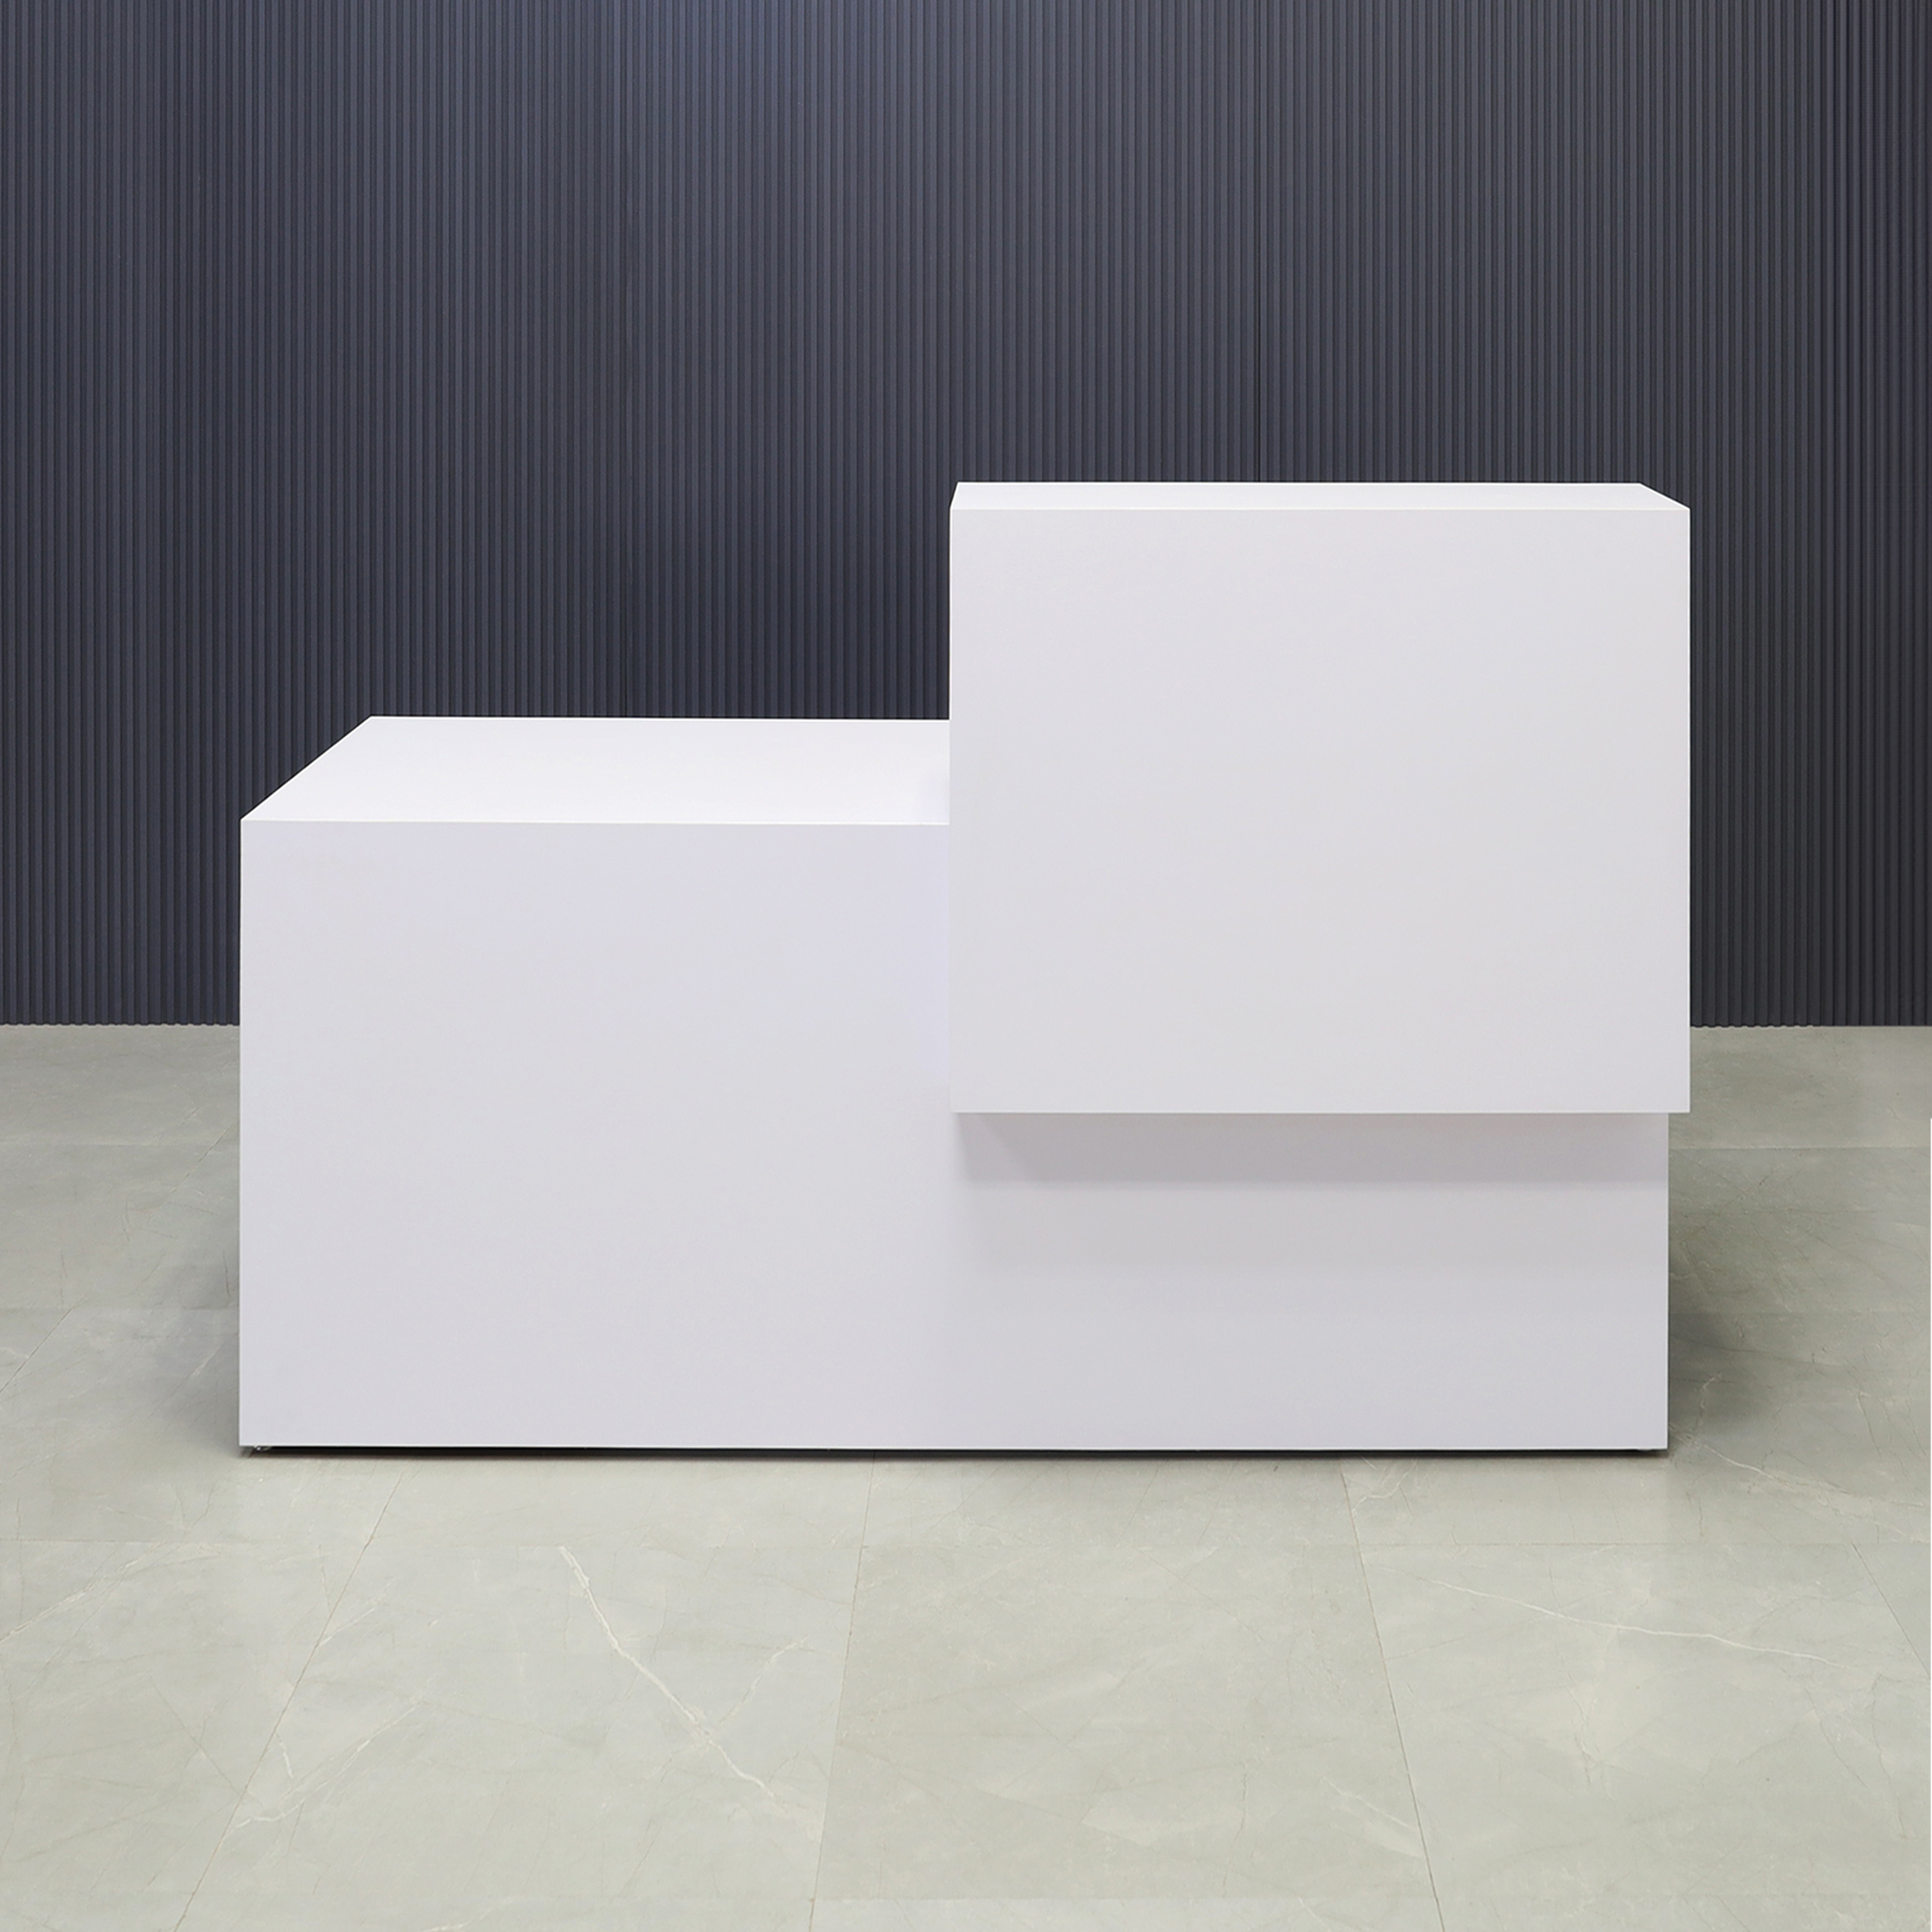 72-inch Los Angeles Reception Desk, right side counter when facing front, in white gloss laminate counter and desk, shown here.